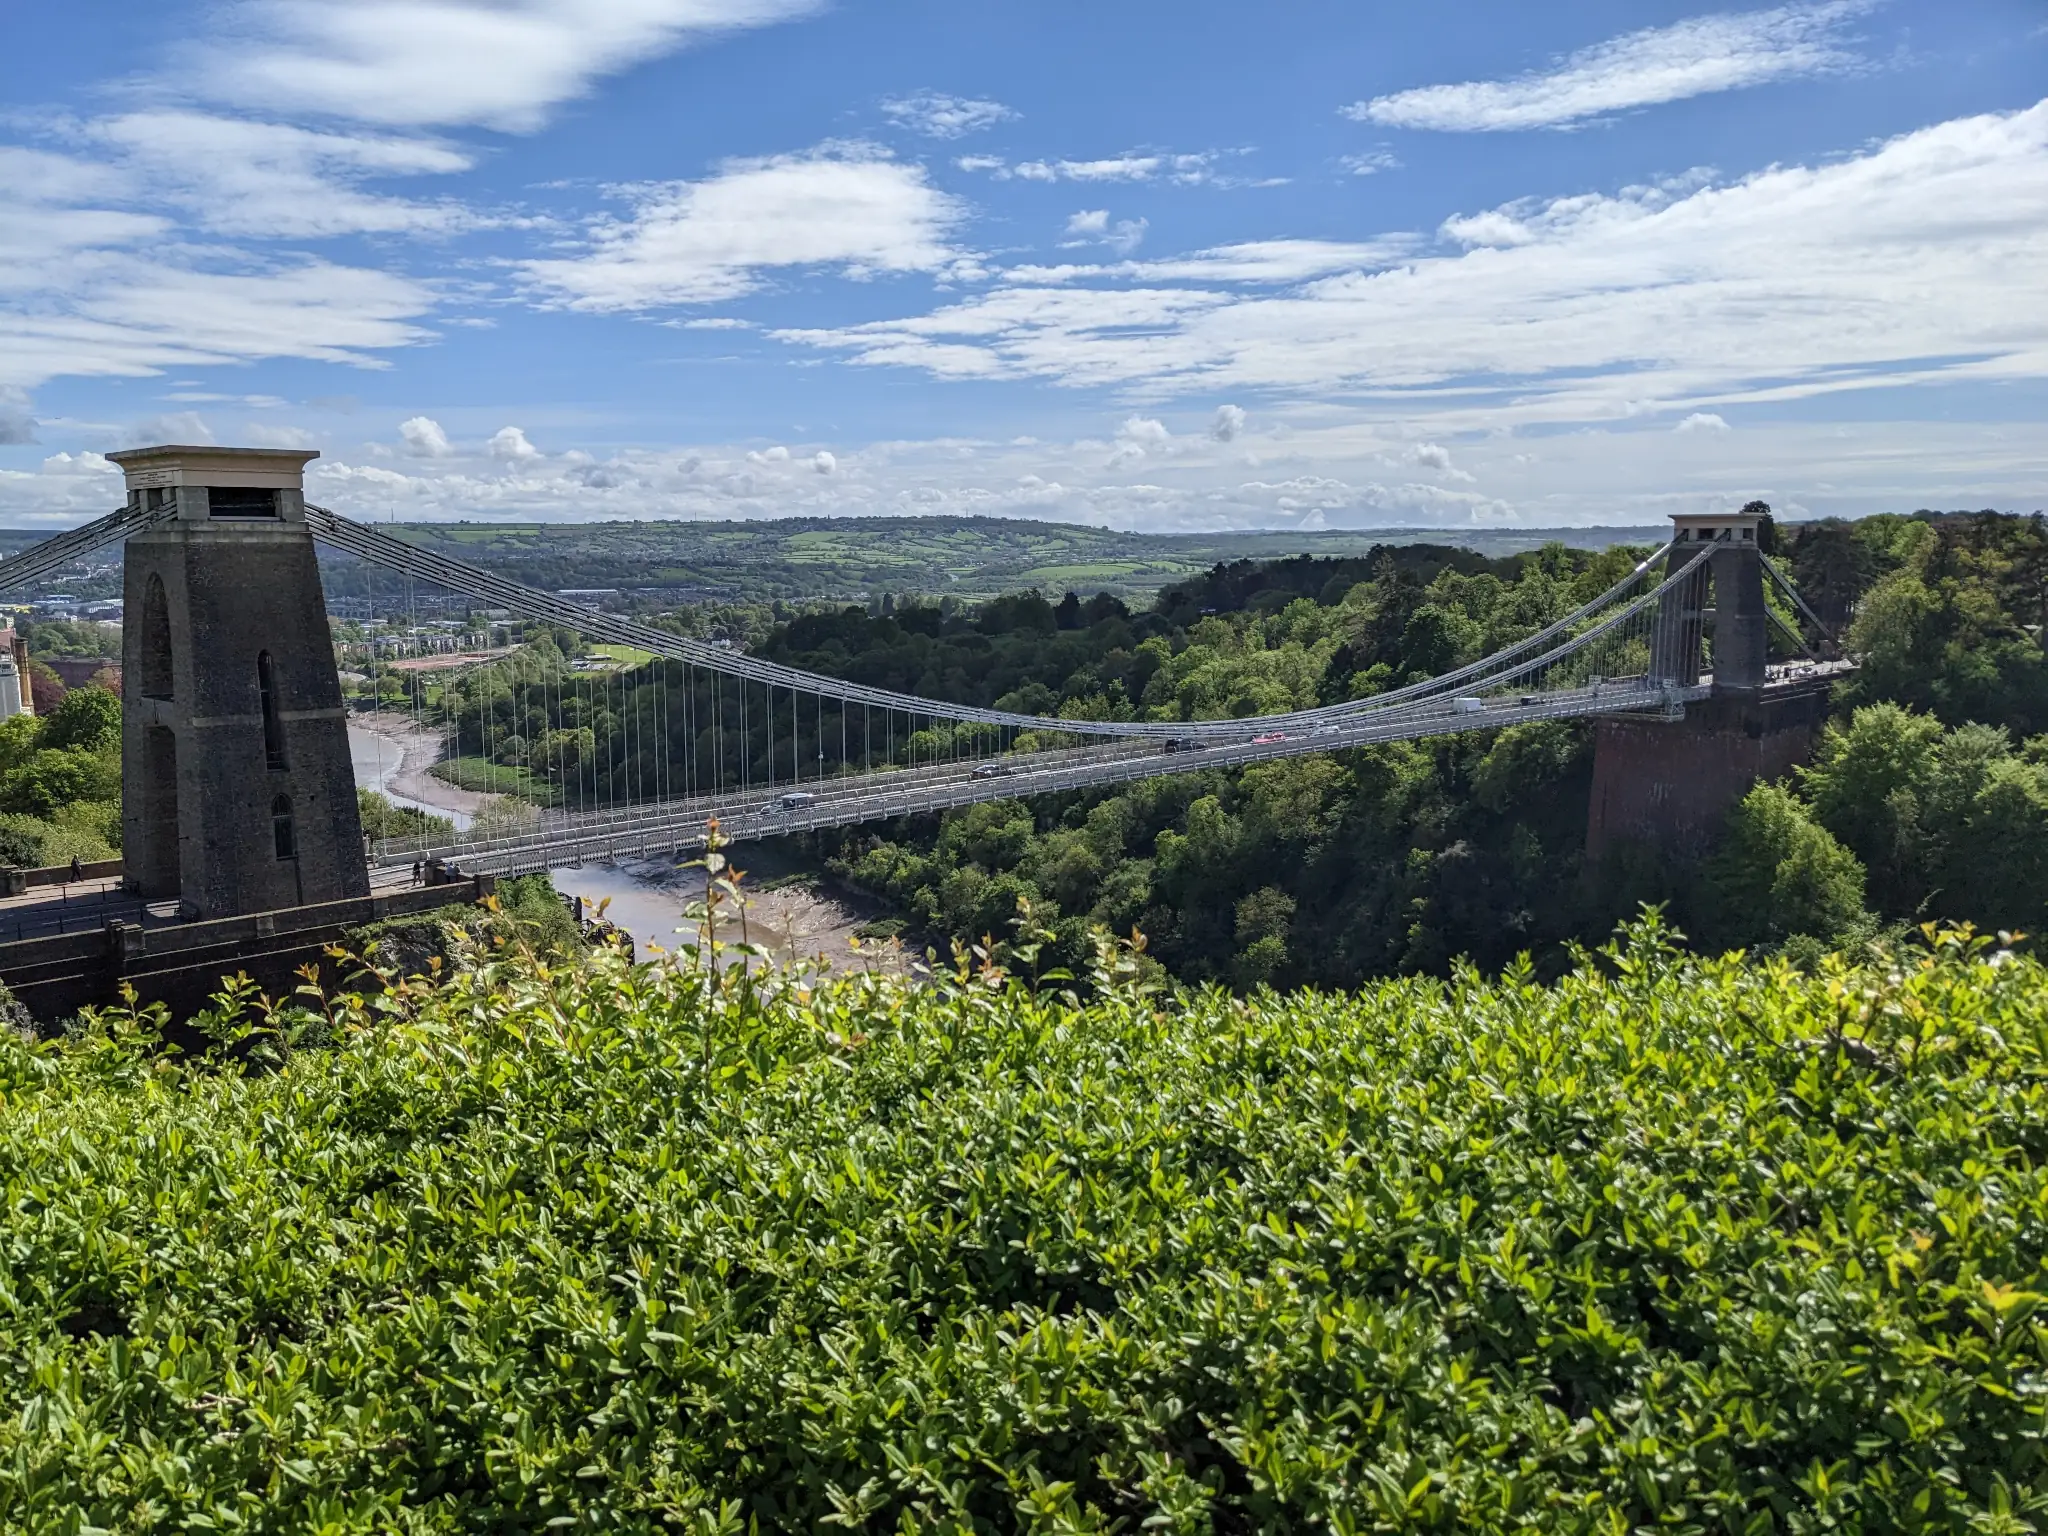 The Clifton Suspension Bridge, as seen from uphill, overlooking the bridge and river.